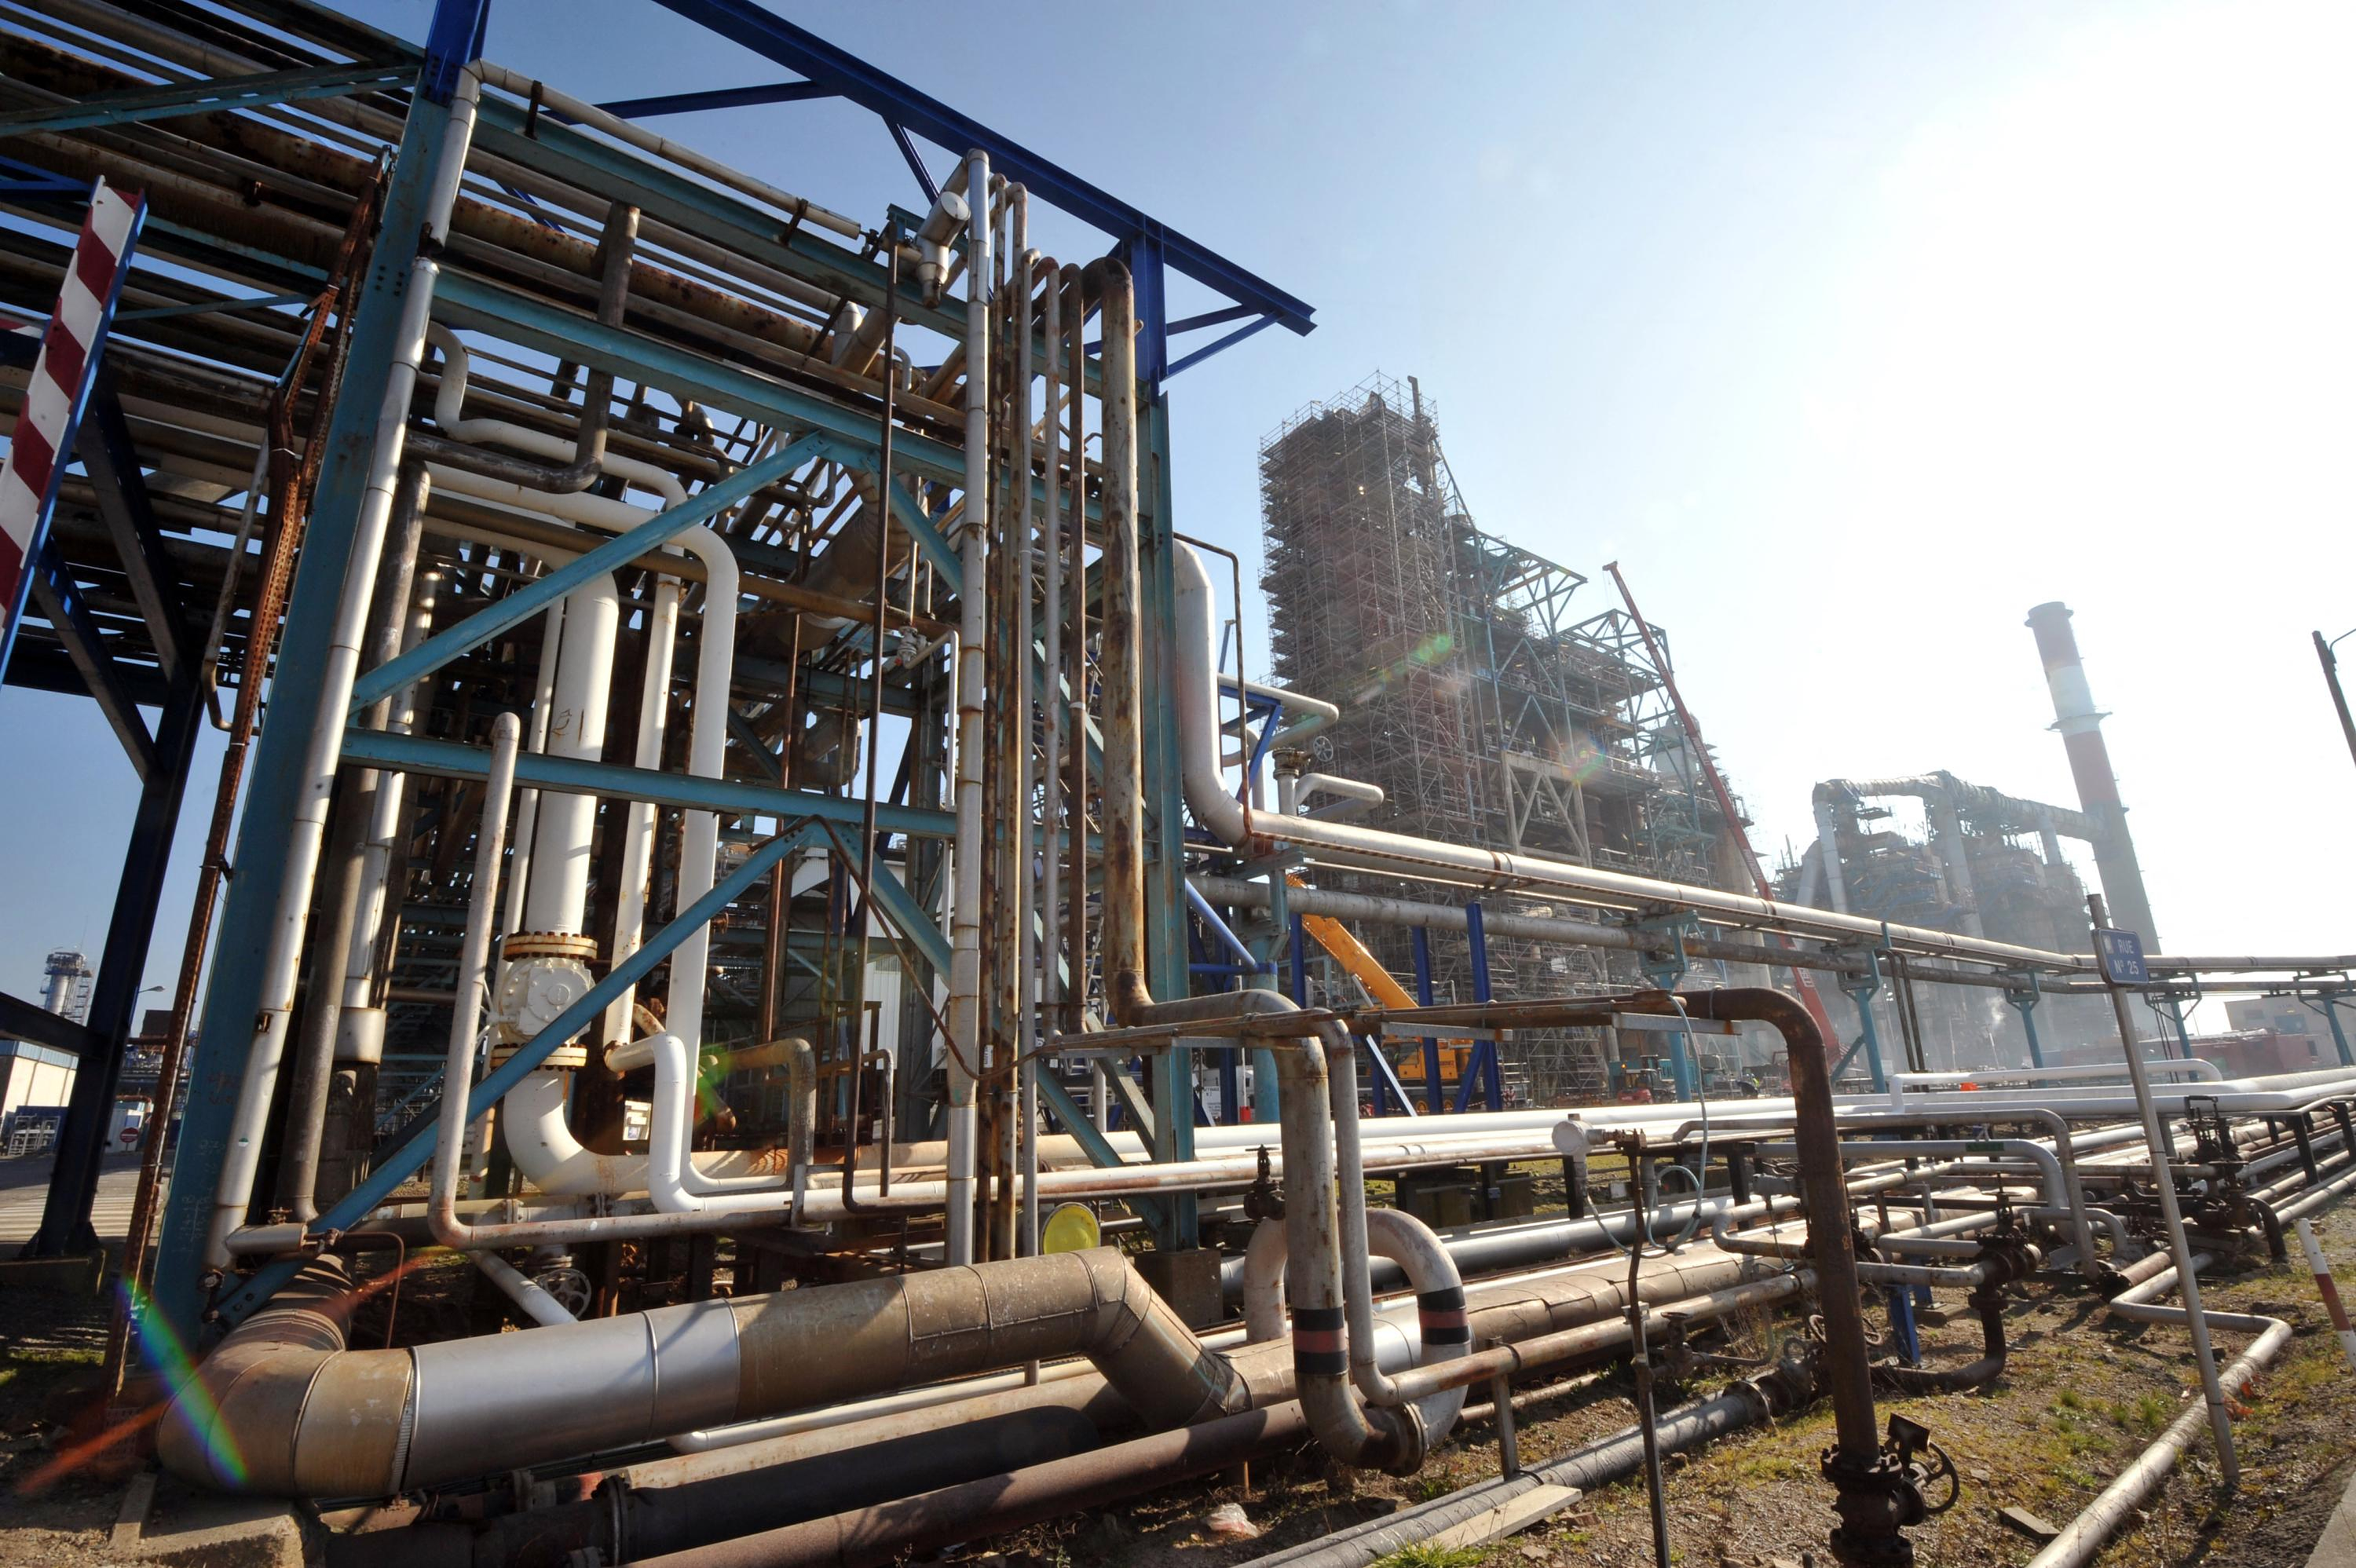 The Donges refinery, second in France, “completely shut down” for “corrosion and leaks”